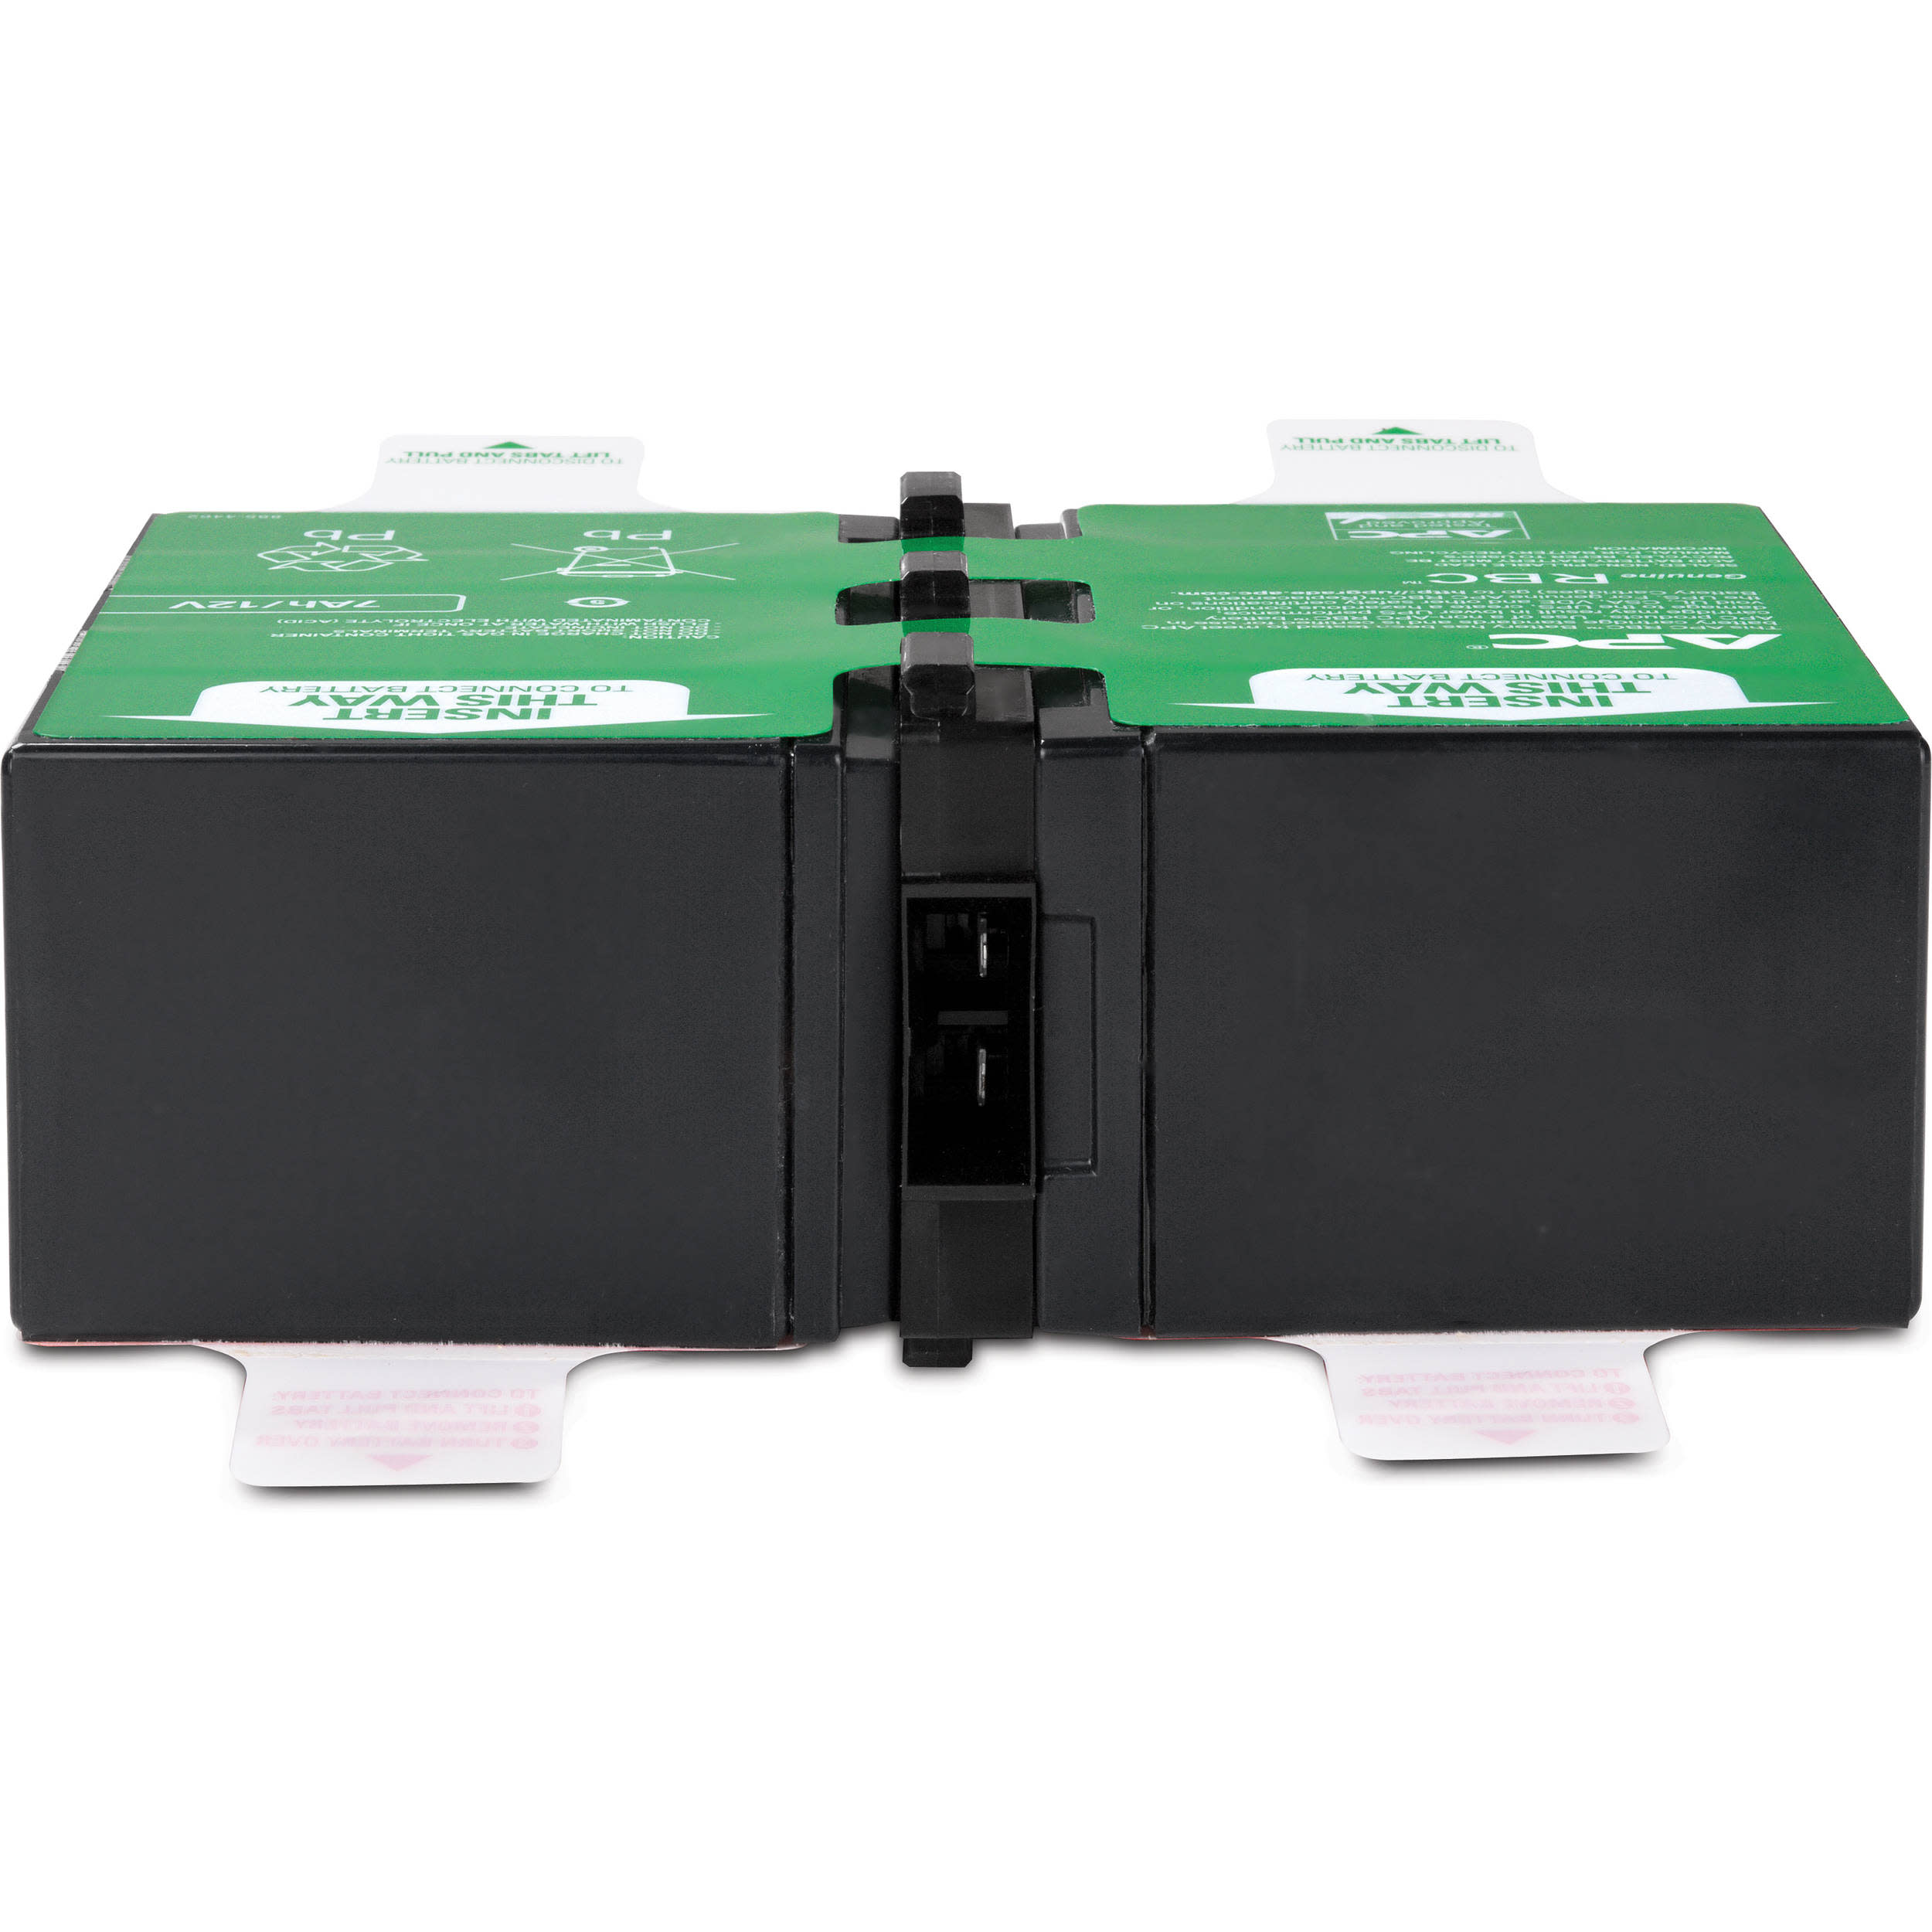 APC UPS Battery Replacement for APC UPS Model BR1000G, BX1350M, BN1350G, BR900GI, BX1000G, BX1300G, SMT750RM2U, SMT750RM2UC, SMT750RM2UNC, and select others (APCRBC123) - image 2 of 2